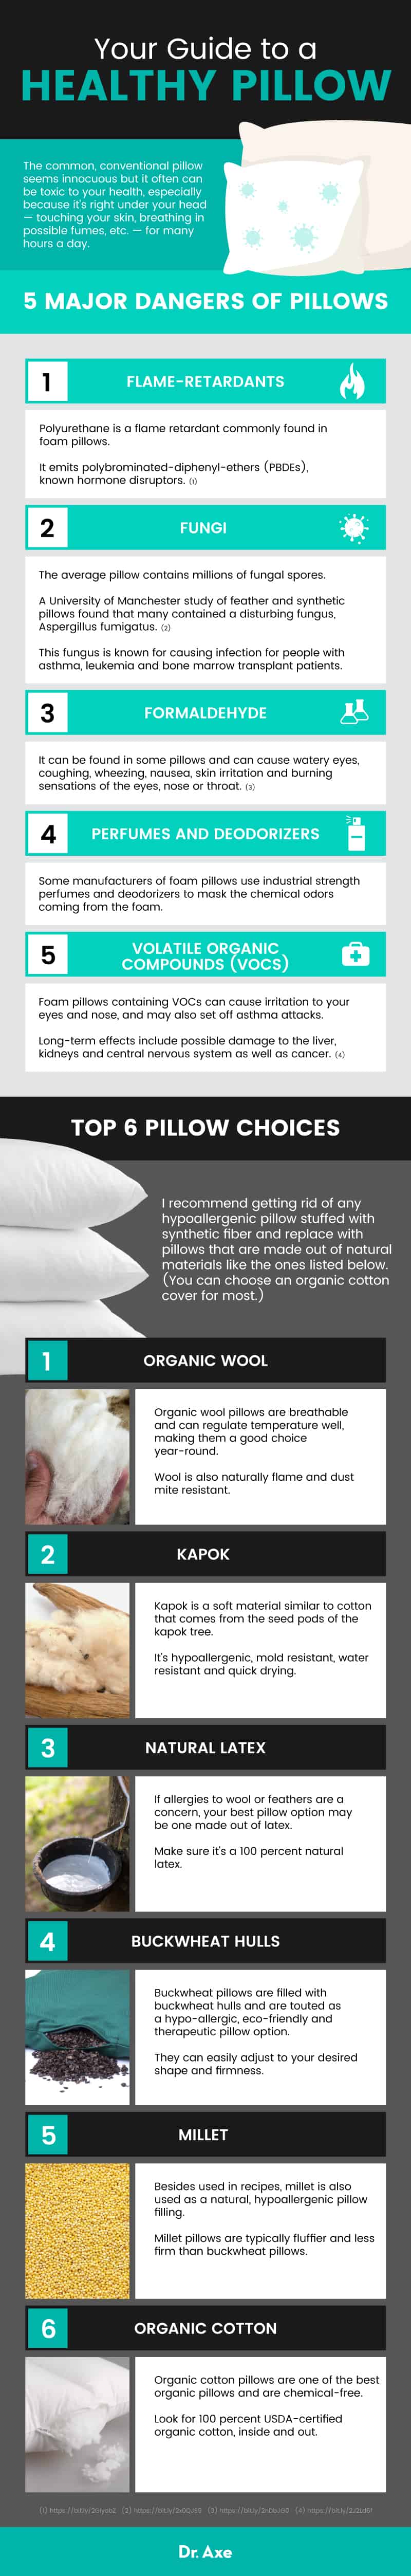 Guide to best pillows - Dr. Axe